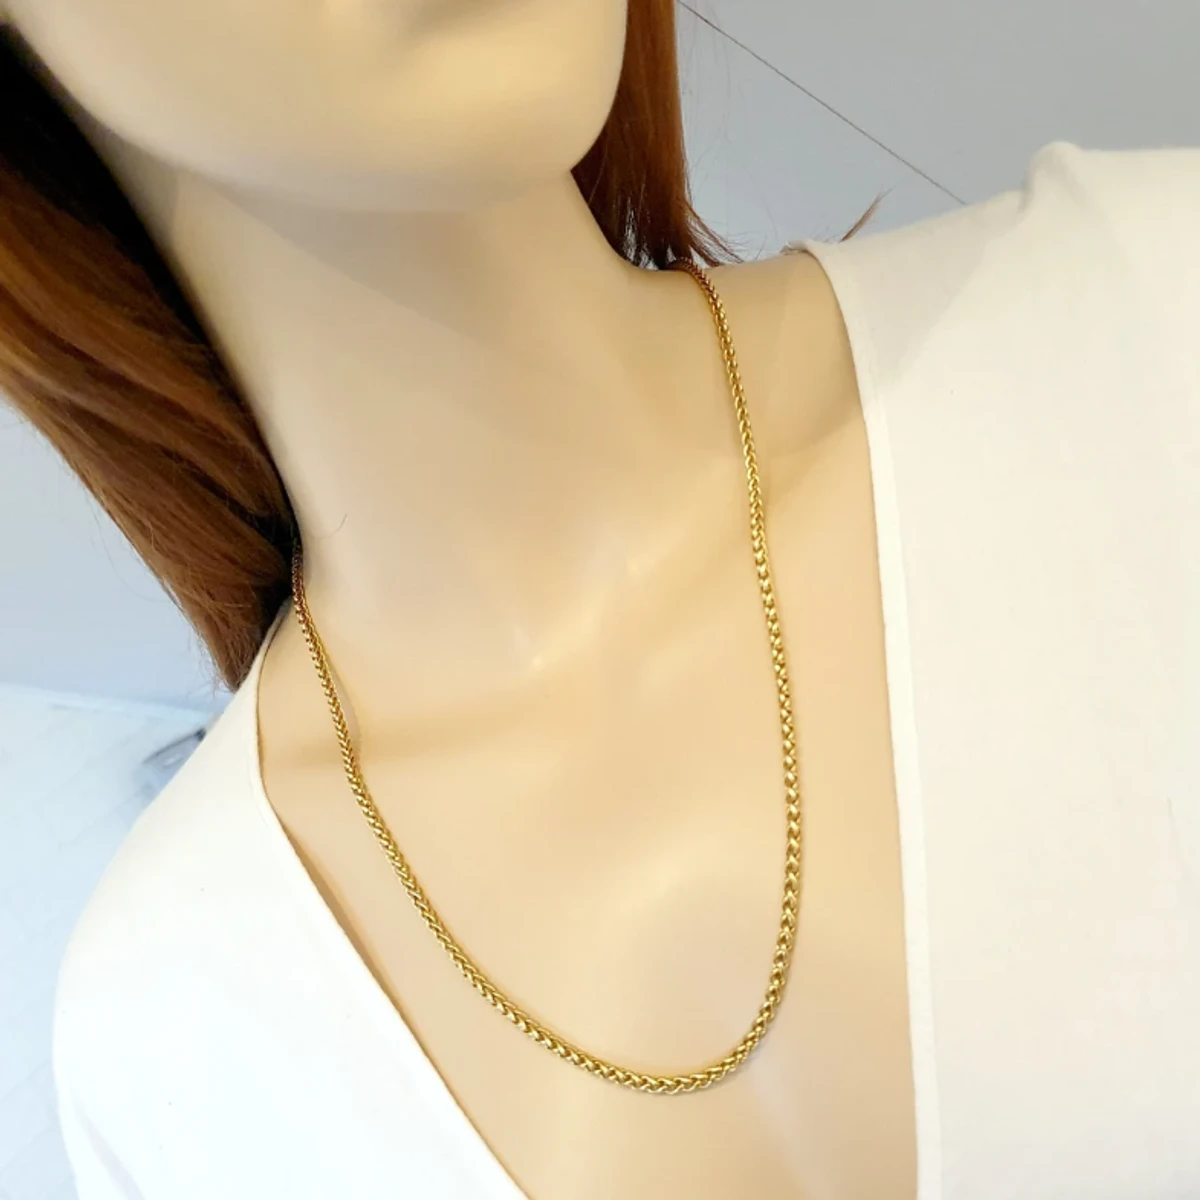 Fashion Necklace Clavicle Chain Sweet Cool Simple Chain Necklace For Women & Men